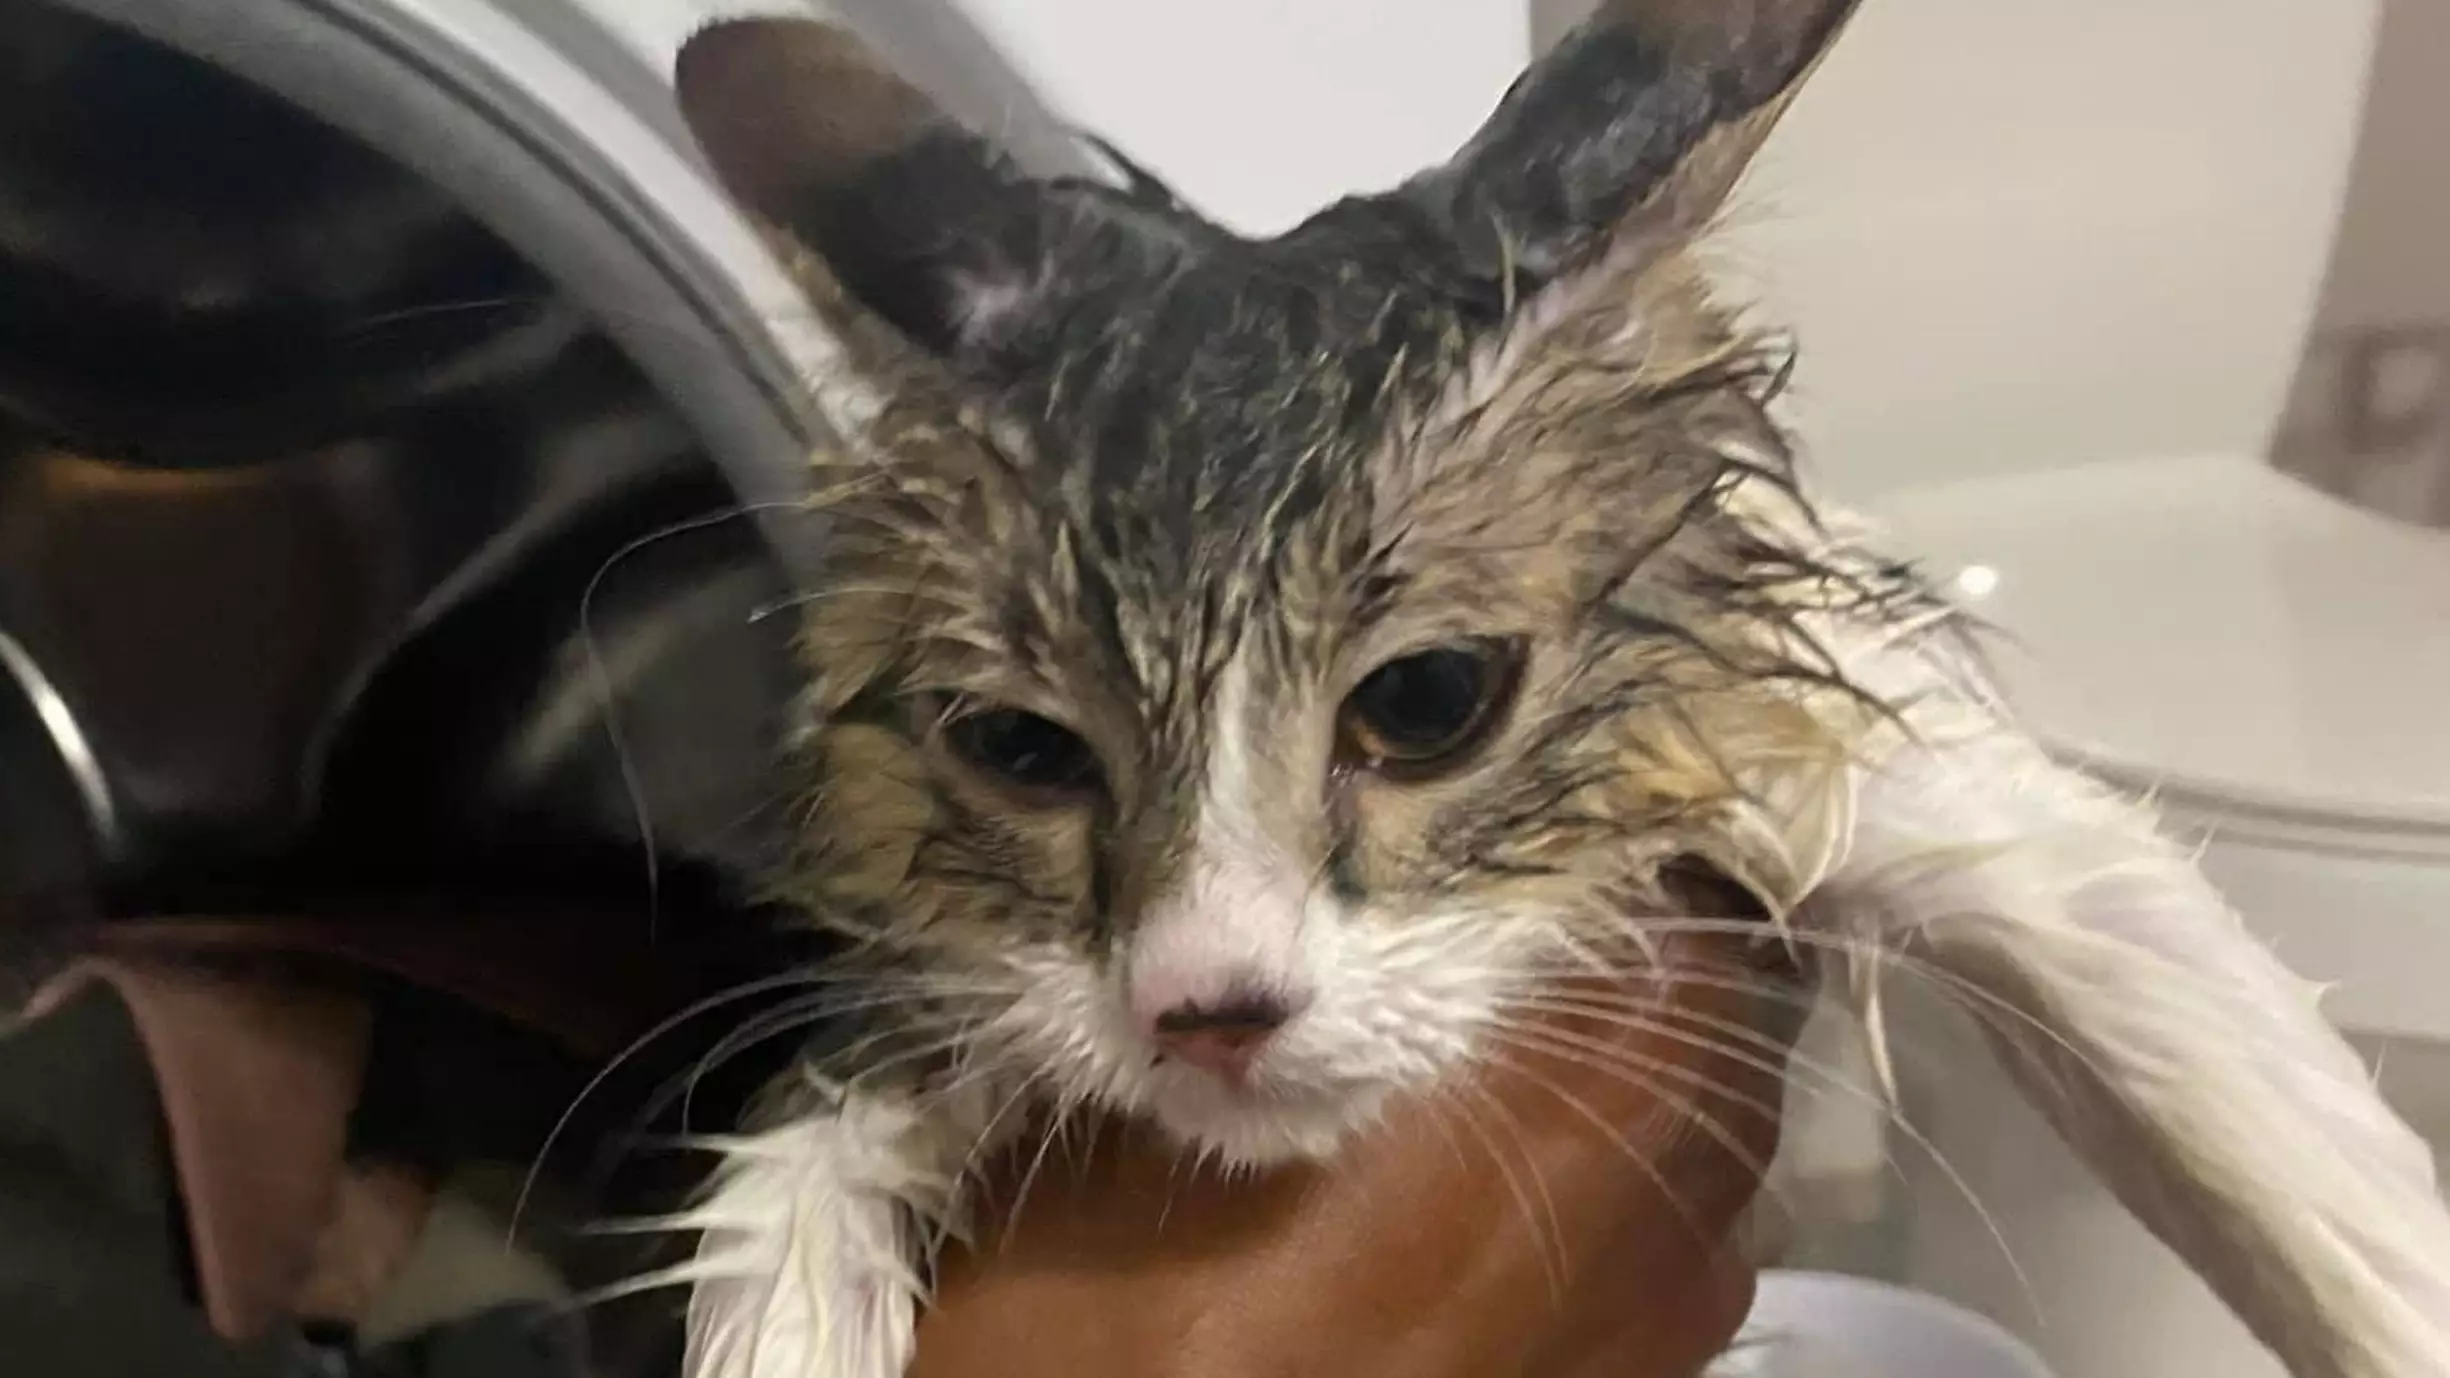 Owner Shares Snap Of Soaking Cat After It Takes A Spin In The Washing Machine